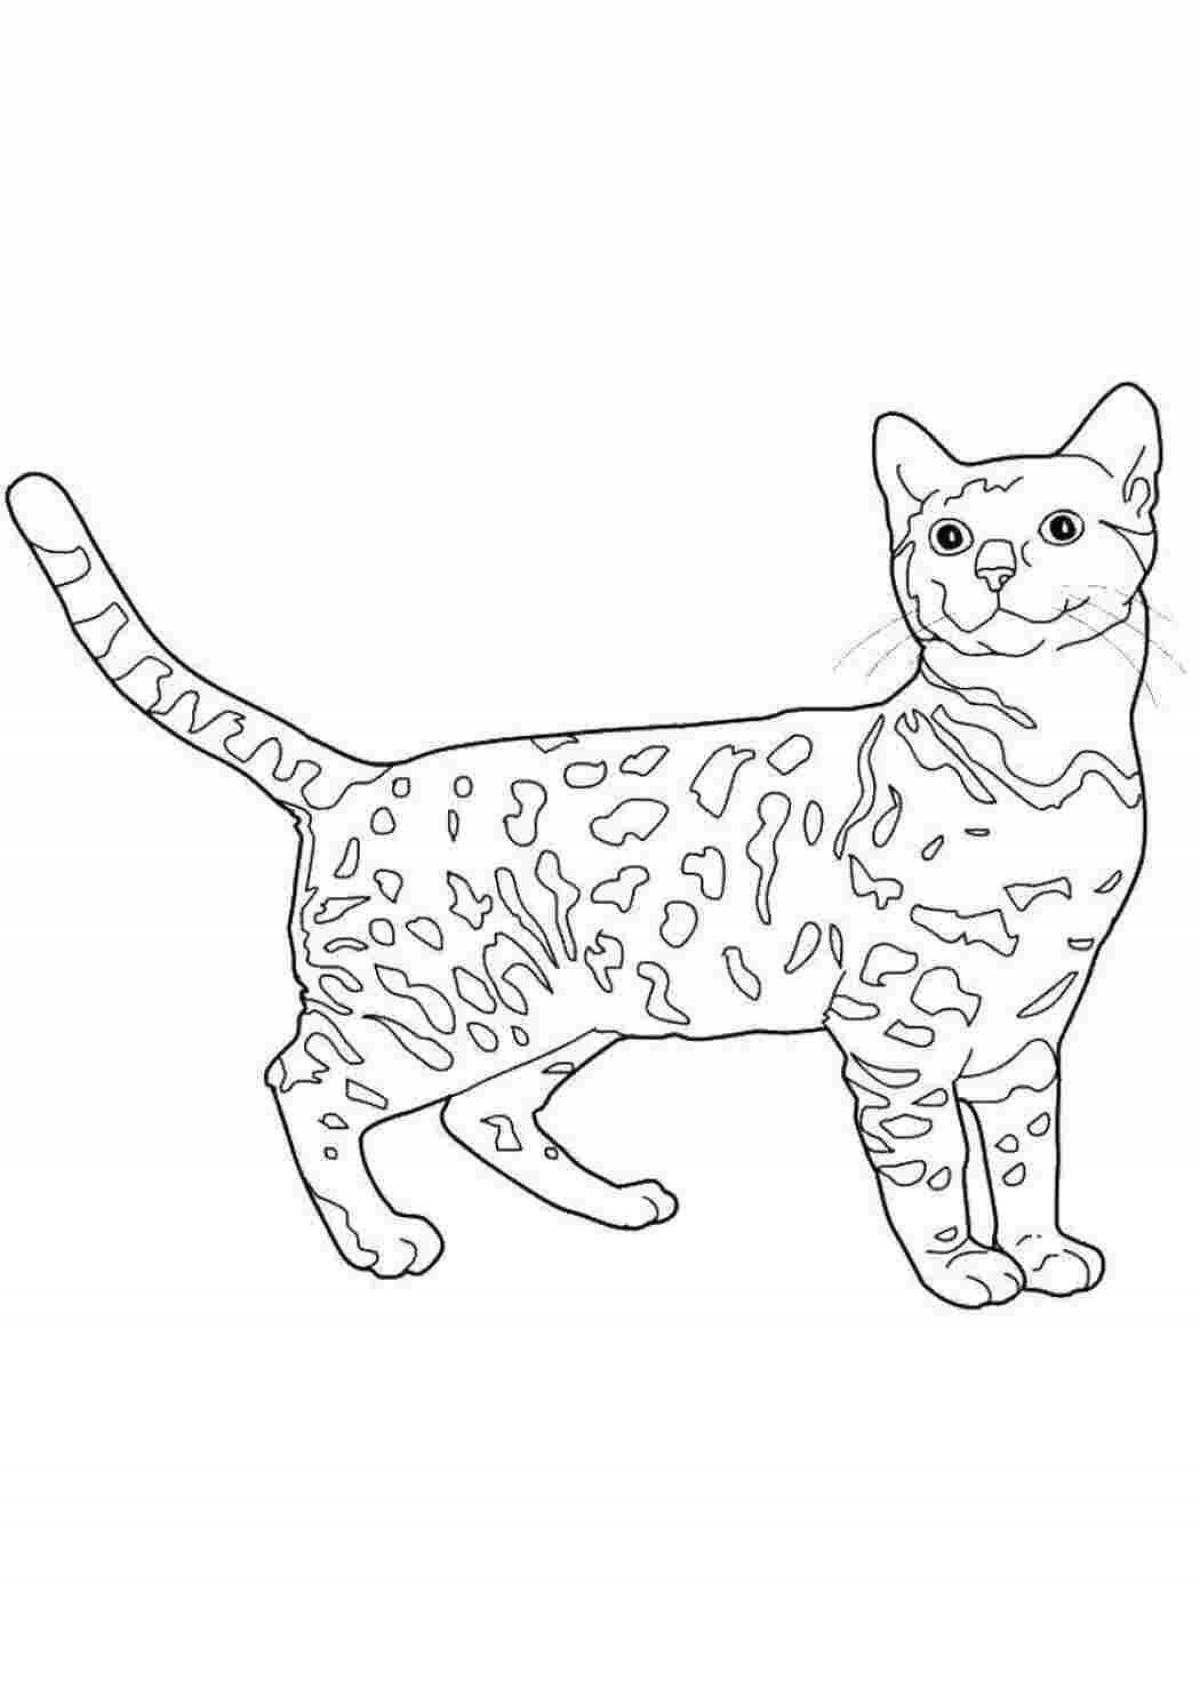 Playful real cat coloring page